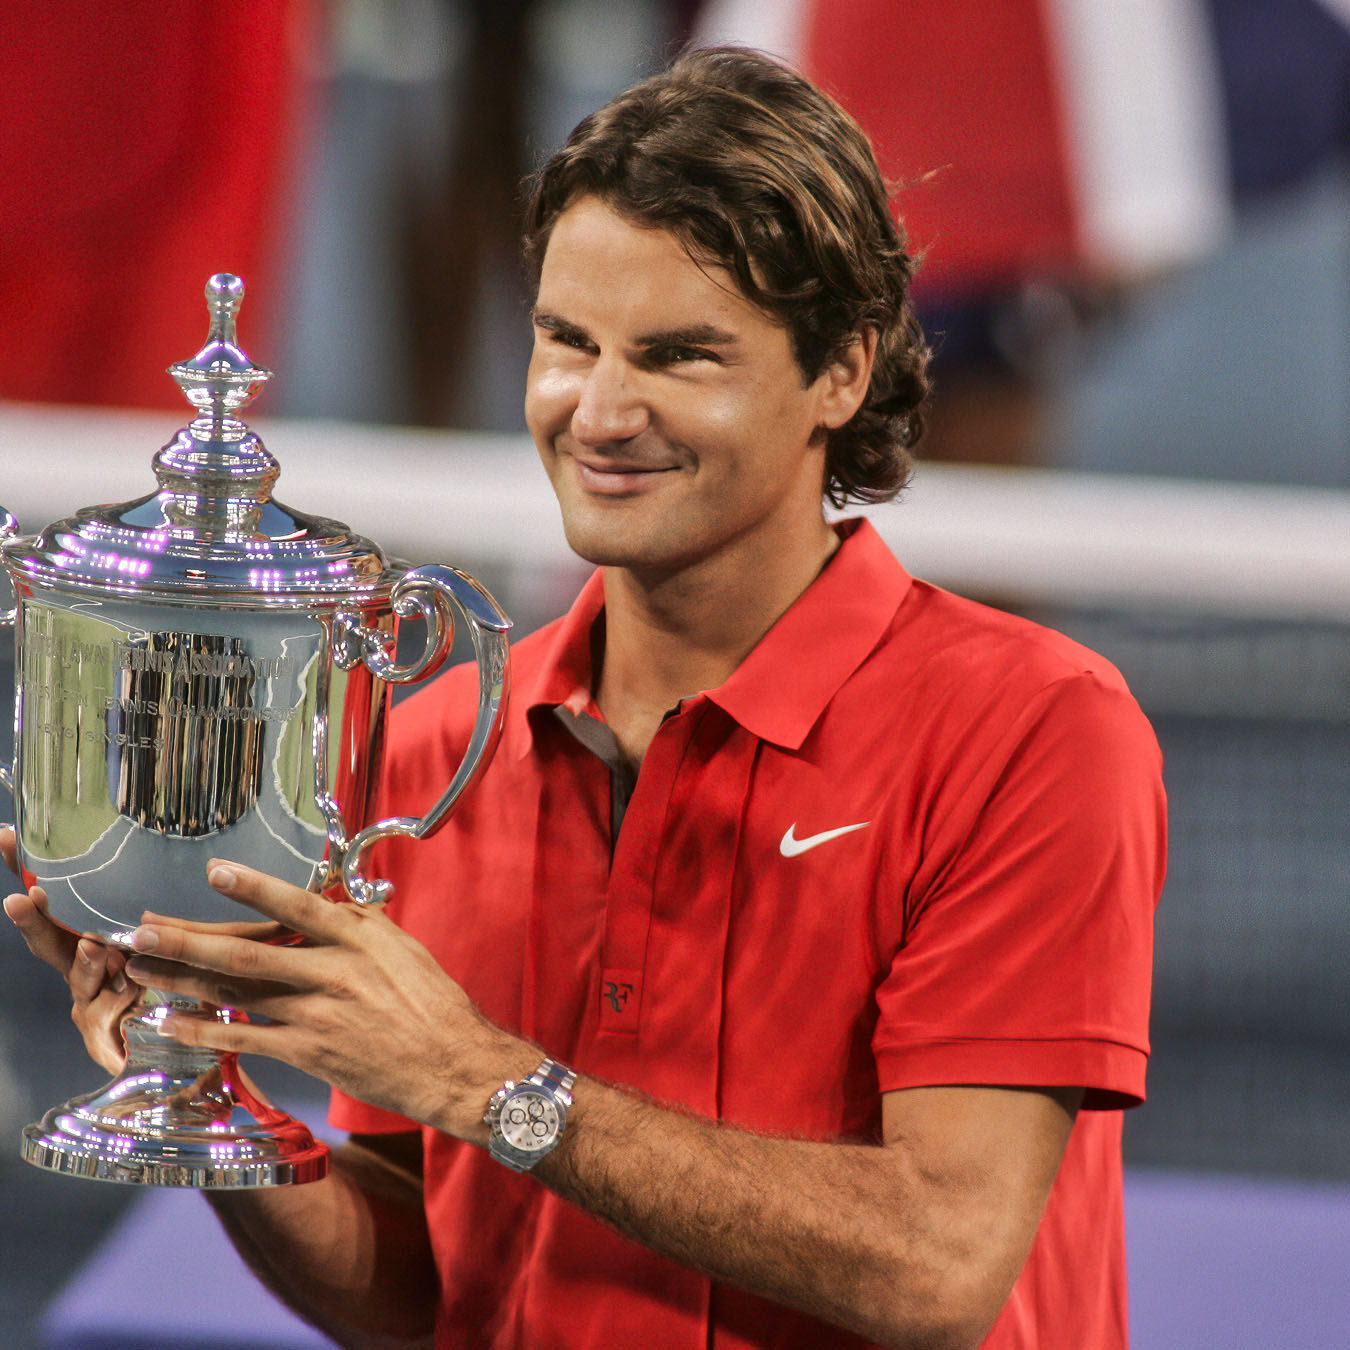 World-renowned tennis player holds his trophy at the US Open.